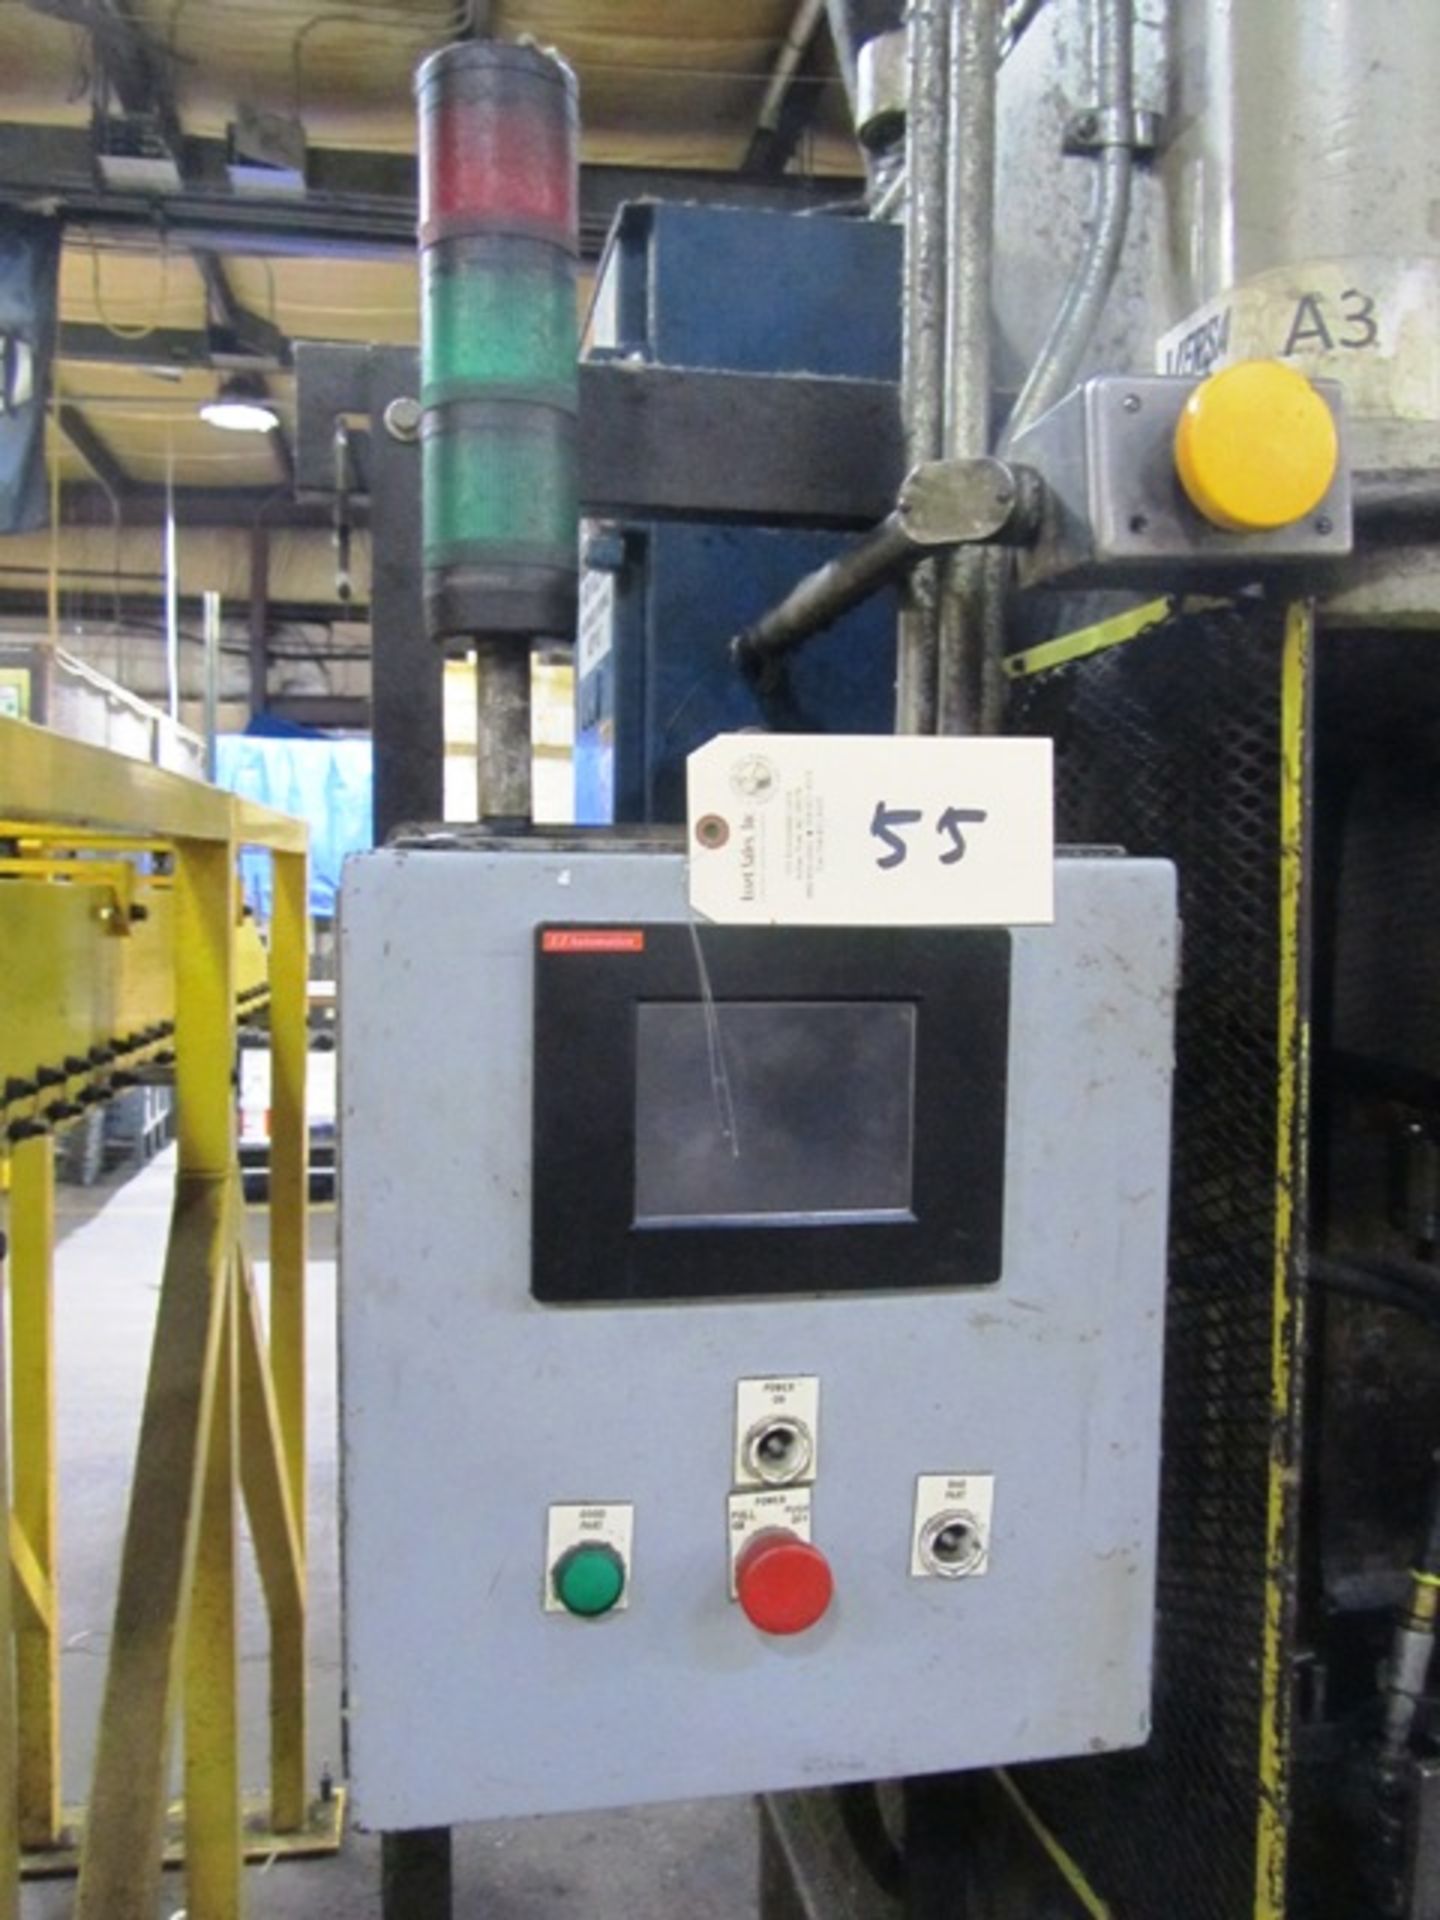 Dennison Model GC01C64D36S06 Approx 20 Ton Hydraulic Press - Image 2 of 3